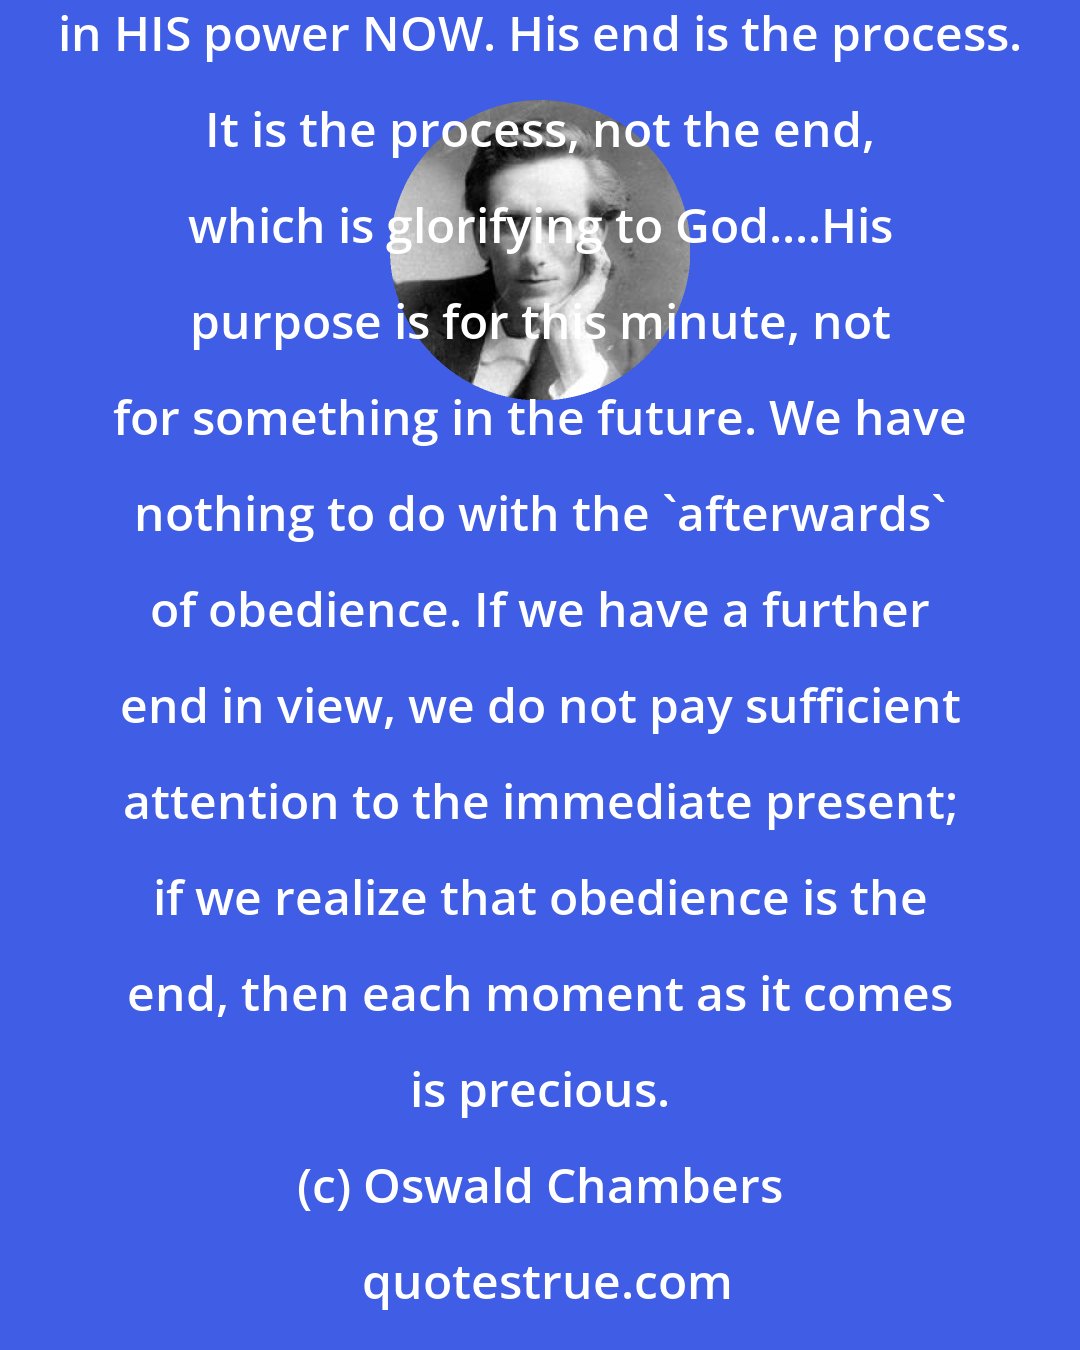 Oswald Chambers: We must never put our dreams of success as God's purpose for us; His purpose may be exactly the opposite. His purpose is that I depend on HIM and in HIS power NOW. His end is the process. It is the process, not the end, which is glorifying to God....His purpose is for this minute, not for something in the future. We have nothing to do with the 'afterwards' of obedience. If we have a further end in view, we do not pay sufficient attention to the immediate present; if we realize that obedience is the end, then each moment as it comes is precious.